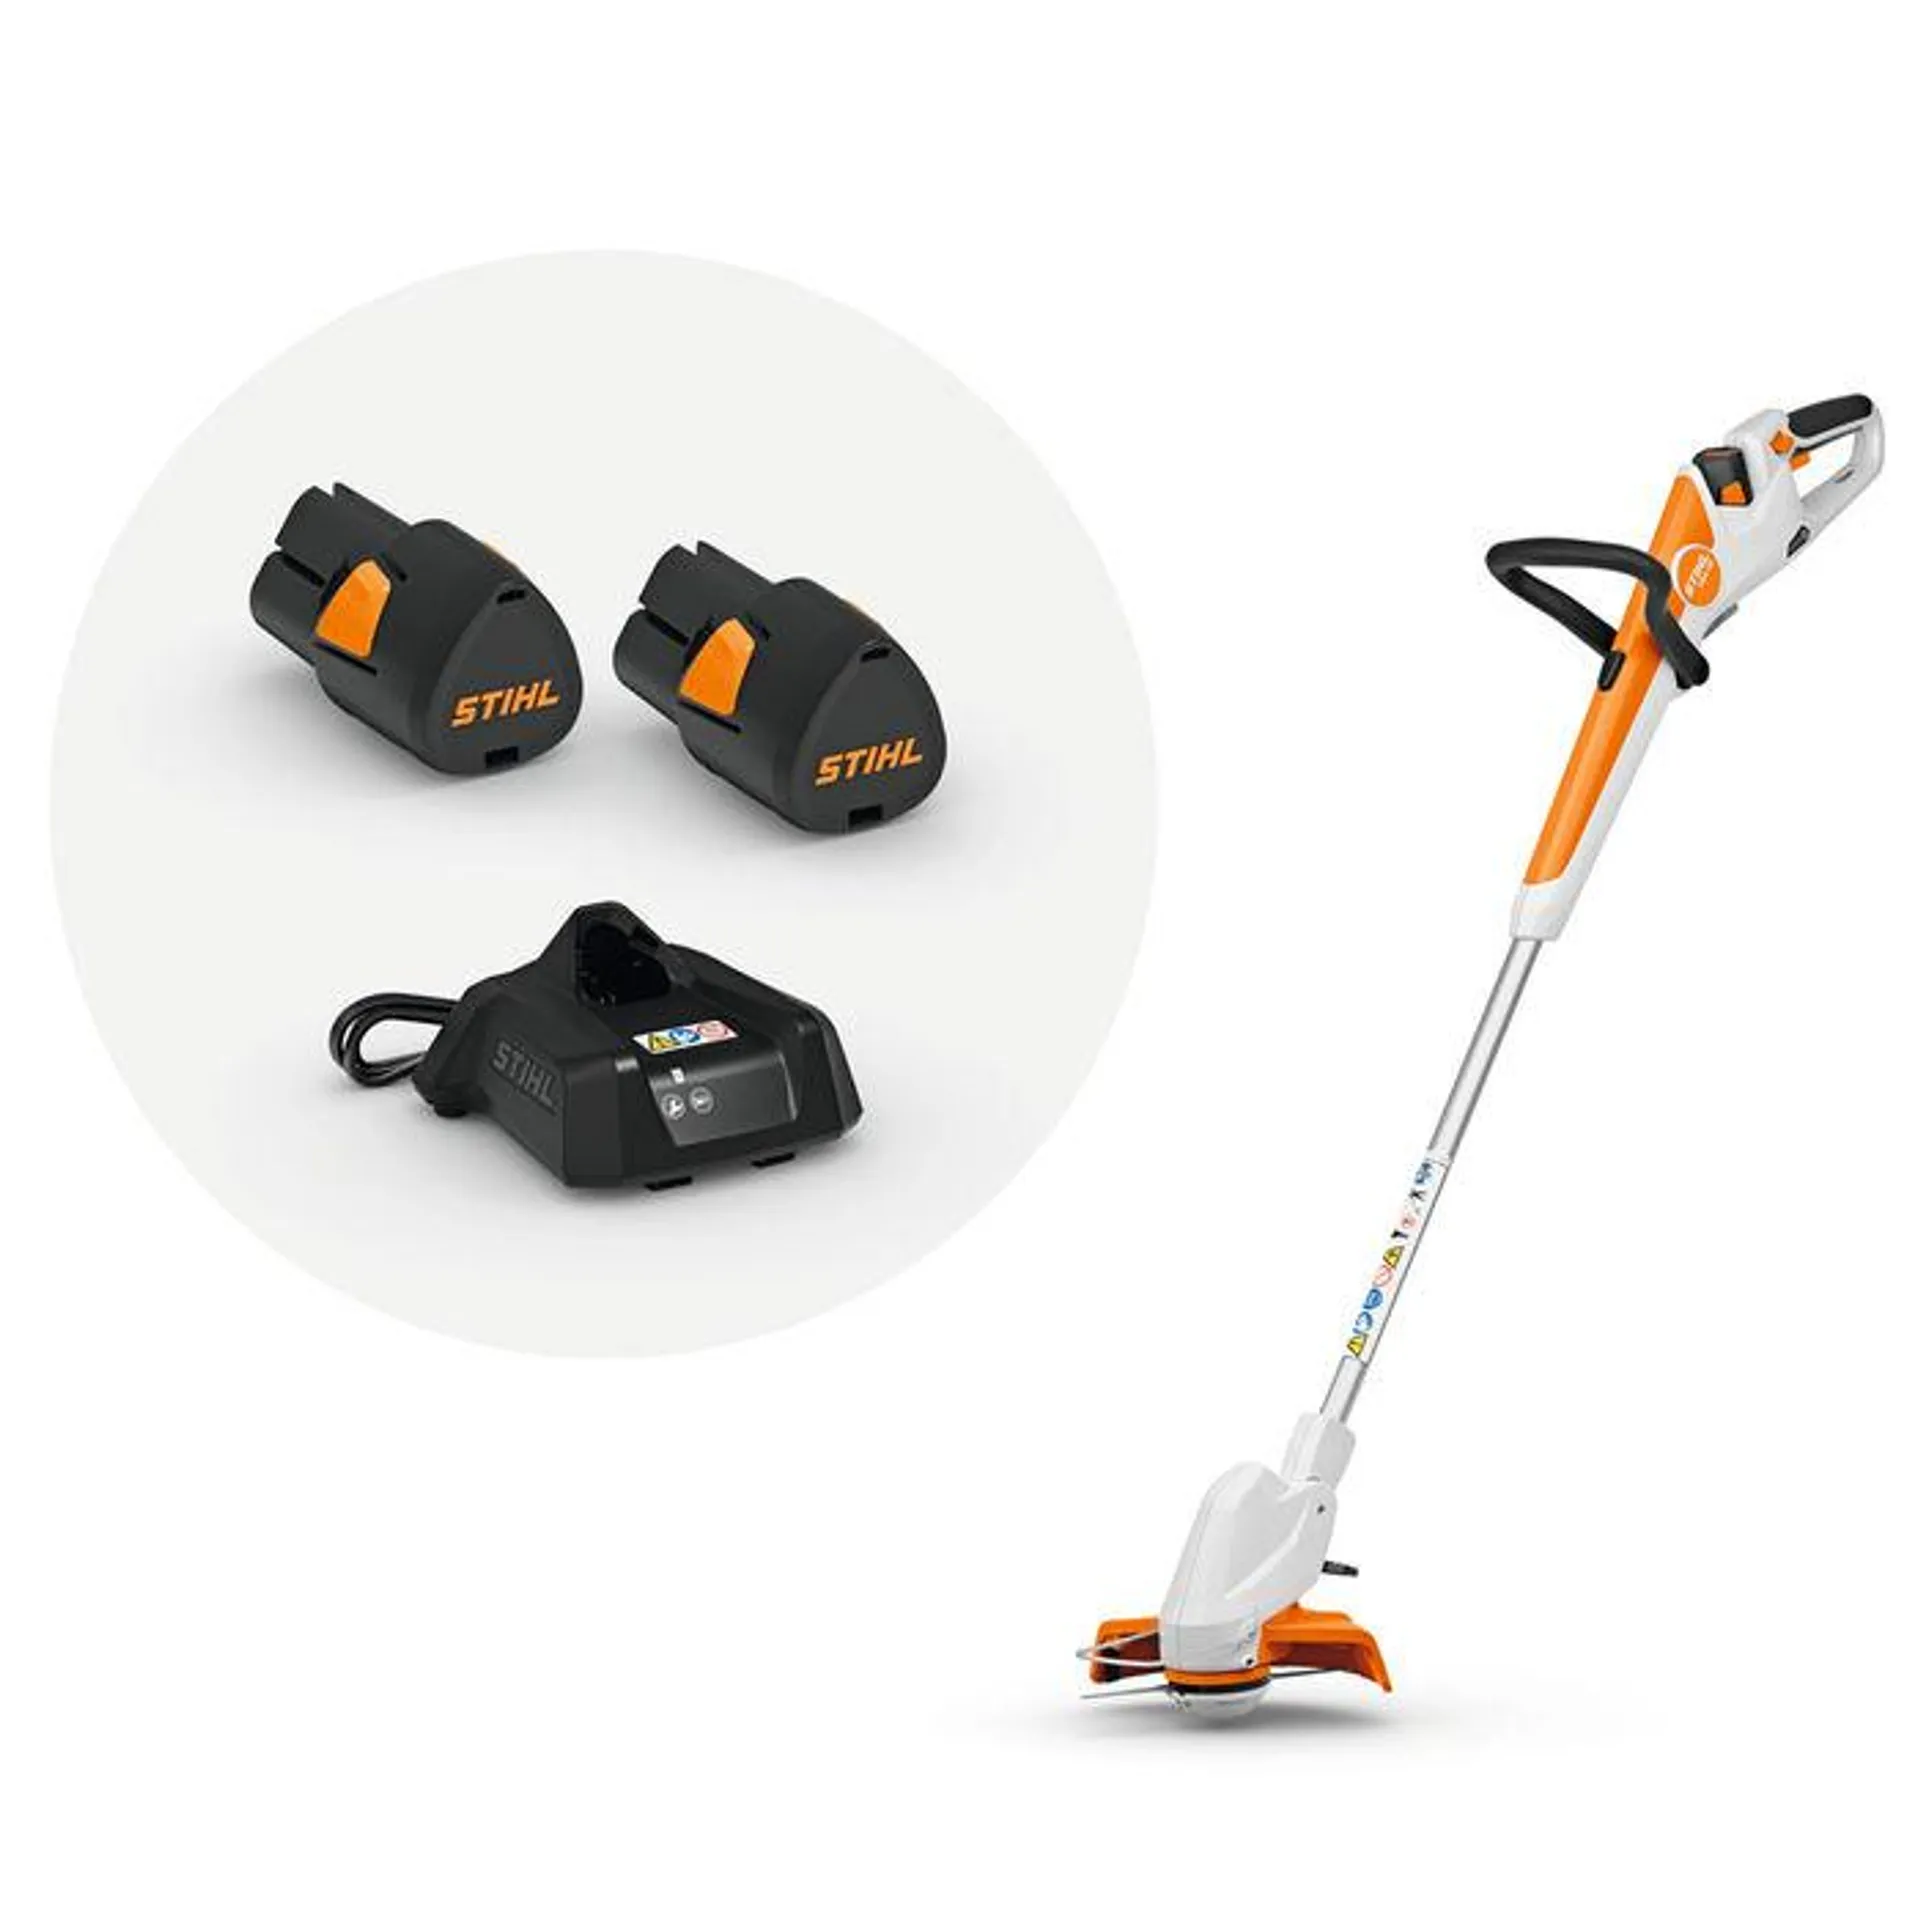 STIHL FSA 30 Battery Linetrimmer Kit(With 2 Batteries & Charger)